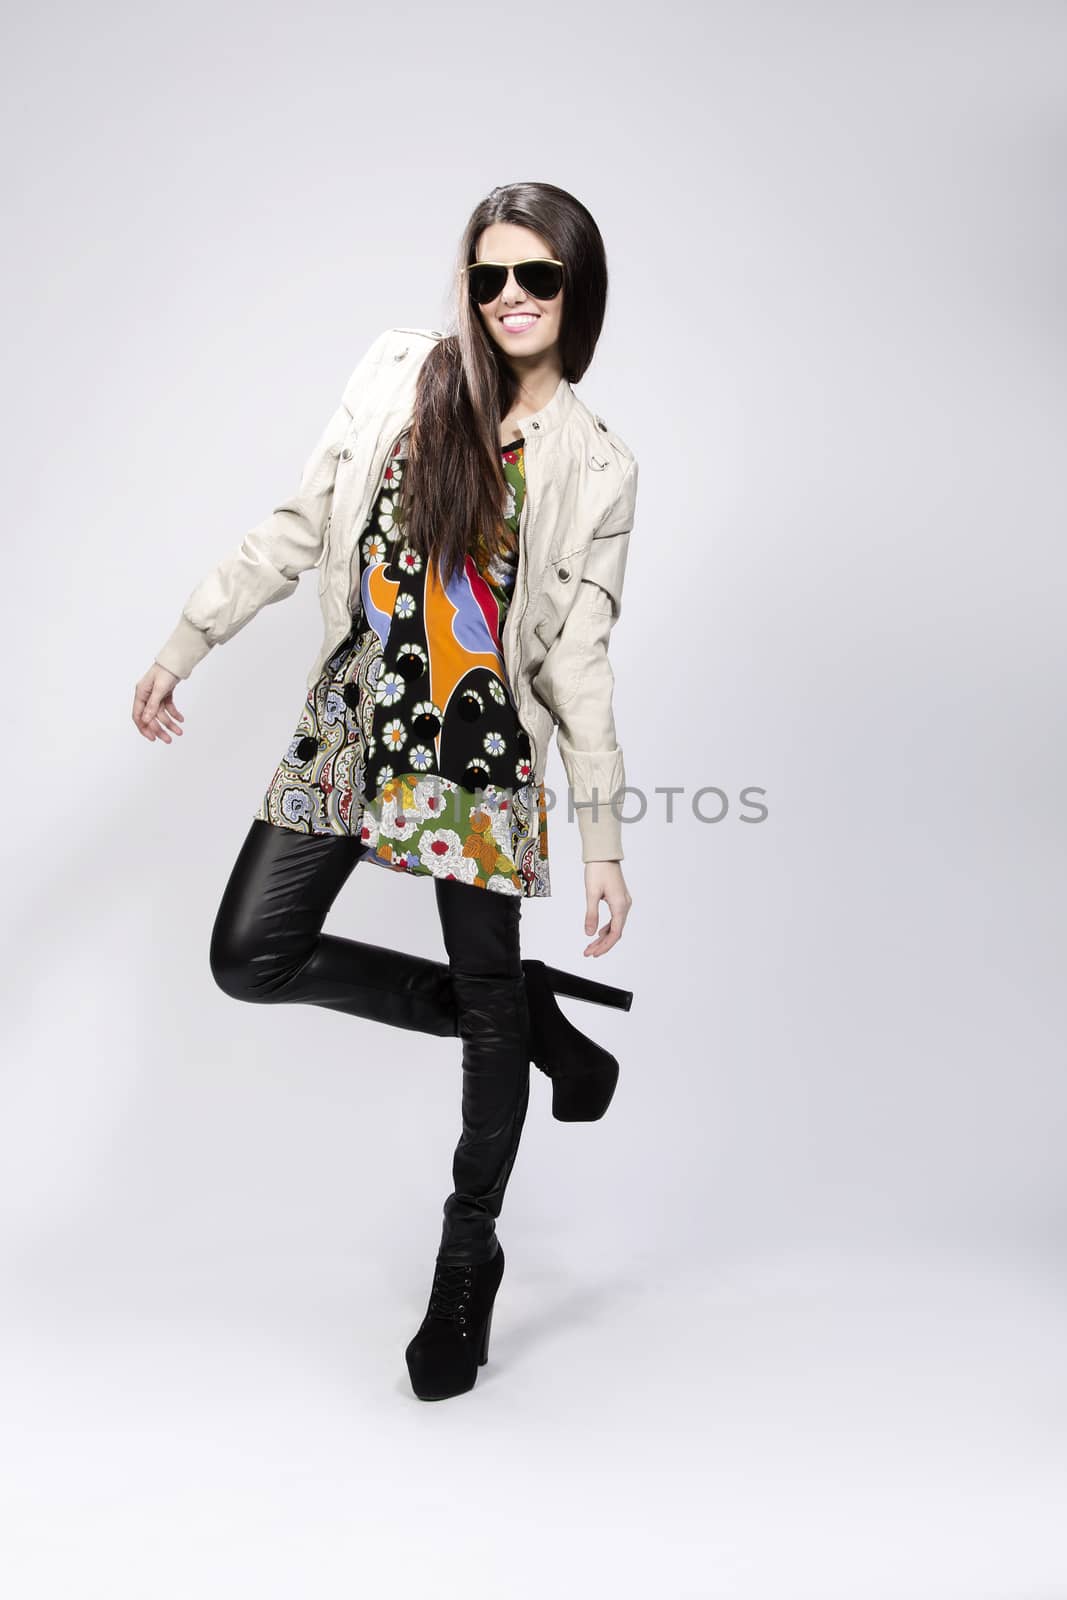 Happy young brunette woman with sun glasses against white background, Fashion portrait